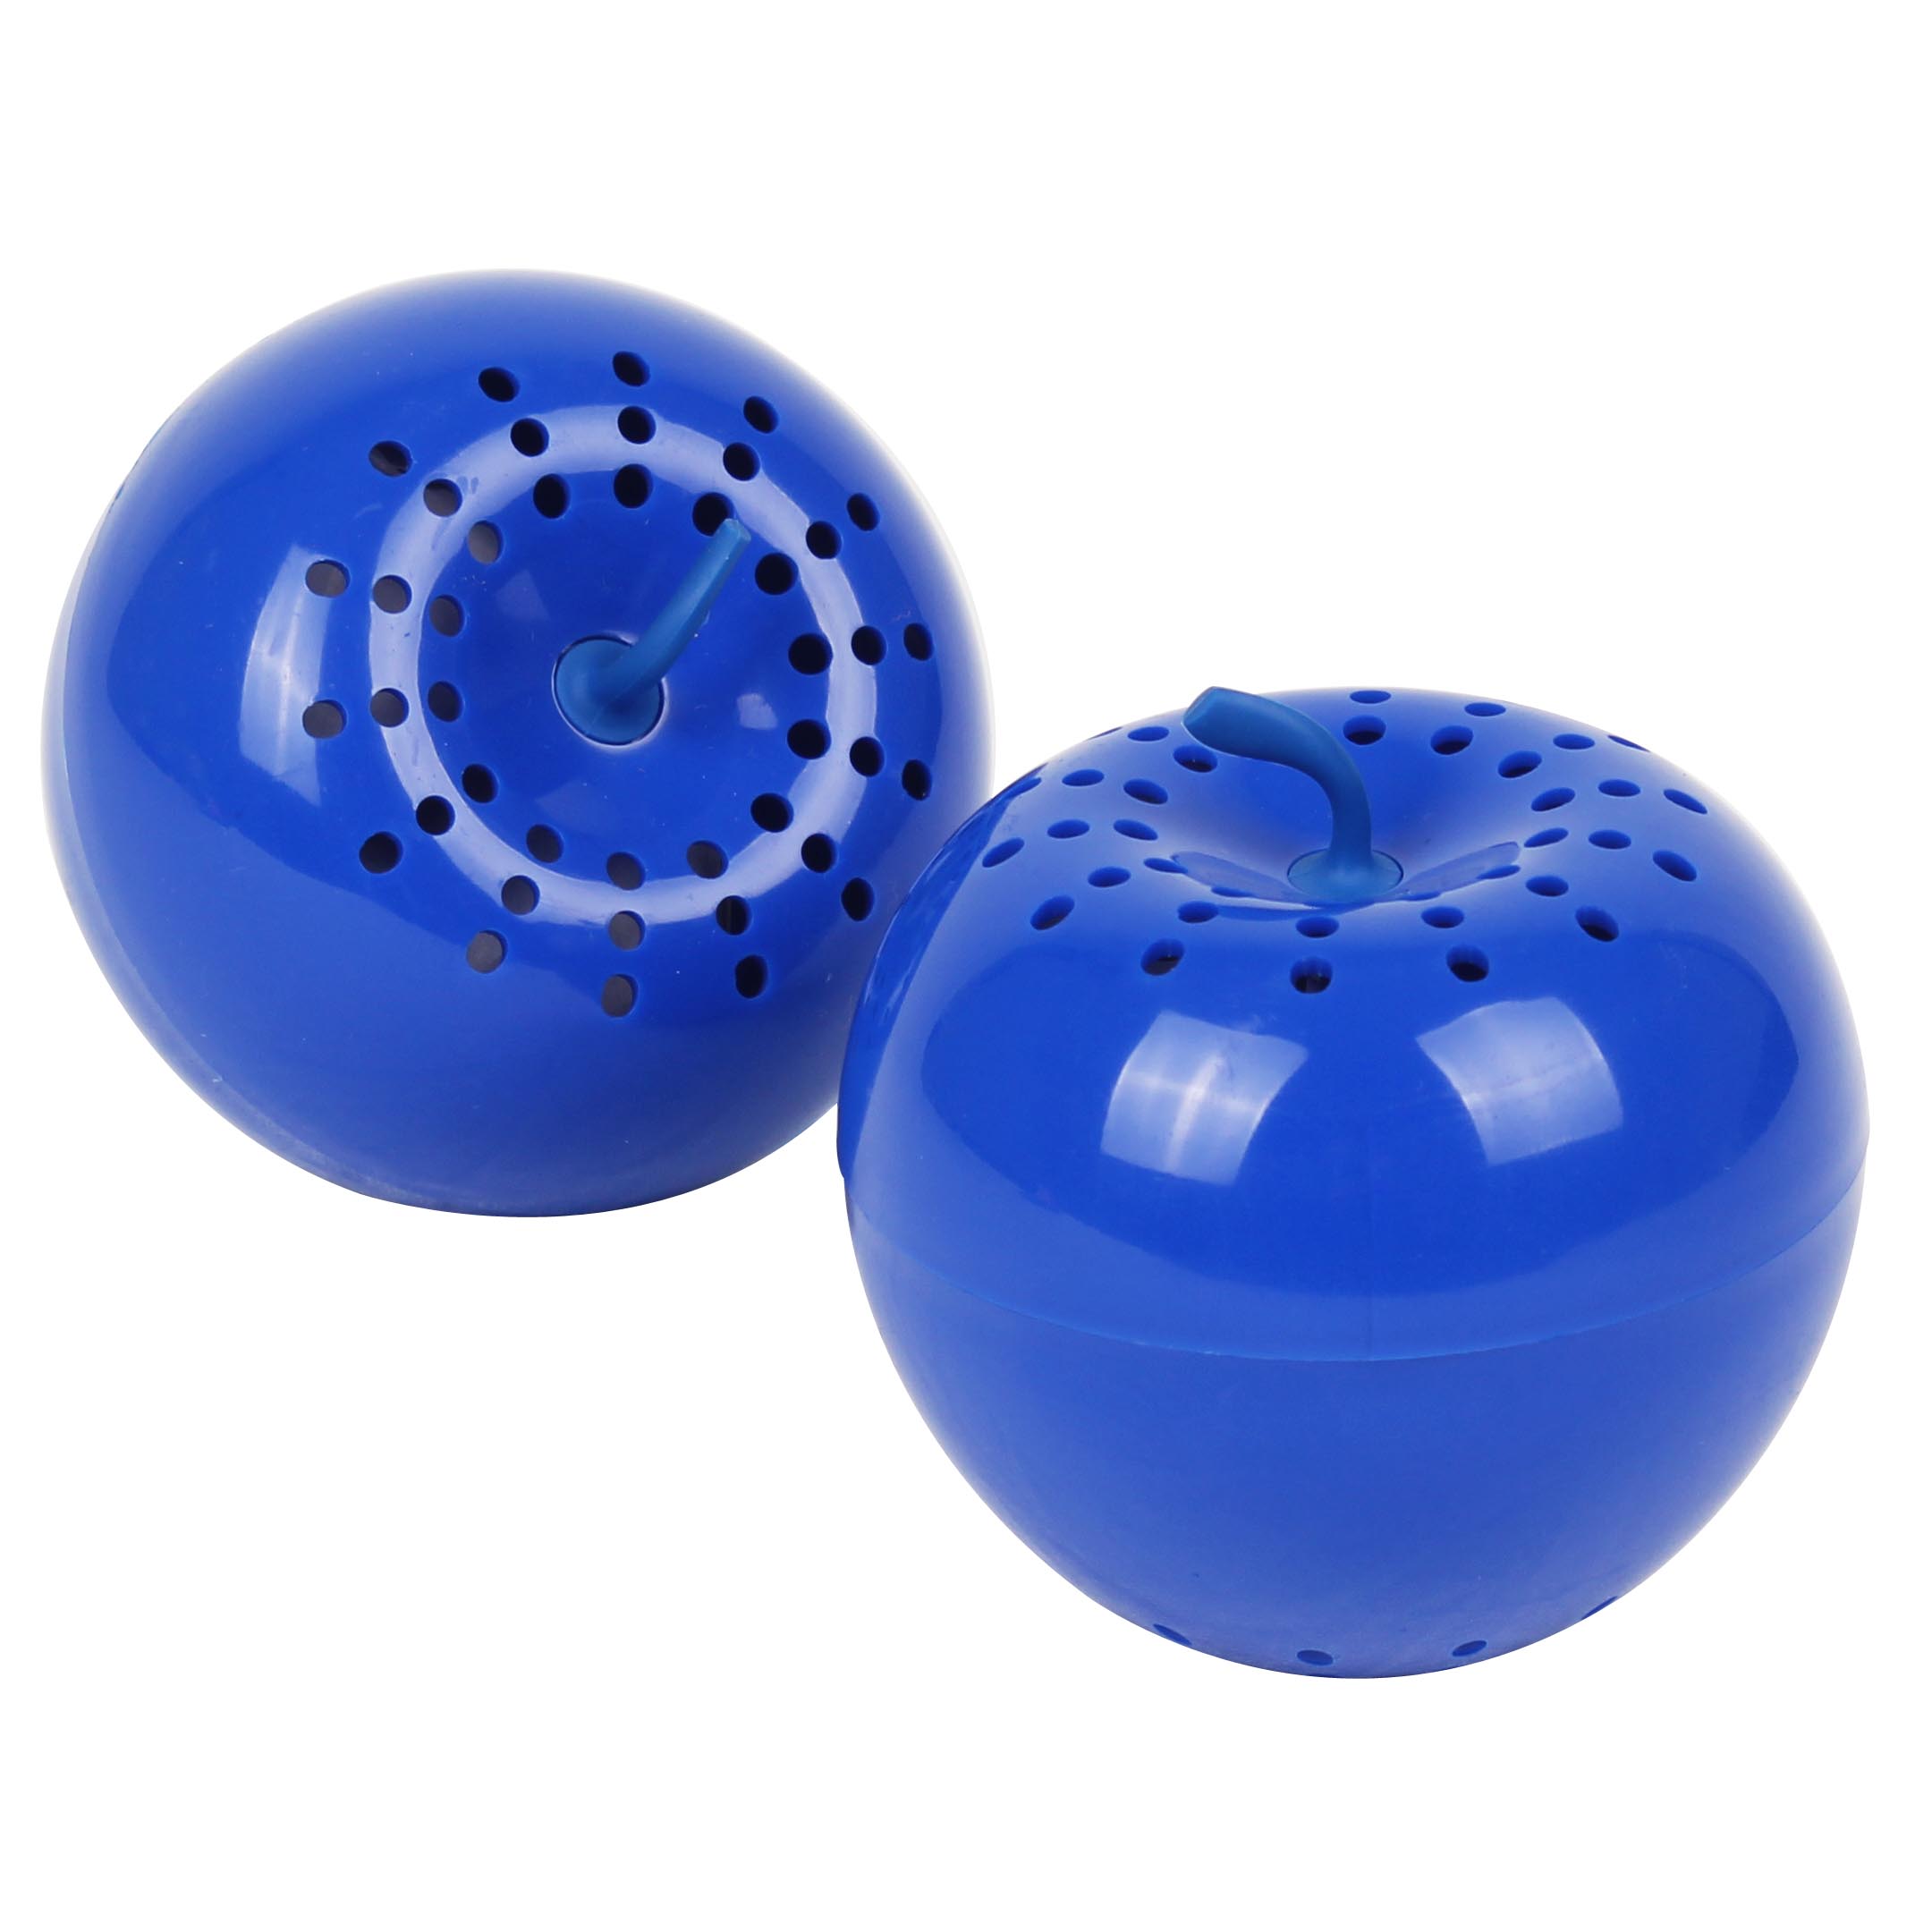 Bluapple Classic 2 Pack Product Image 2